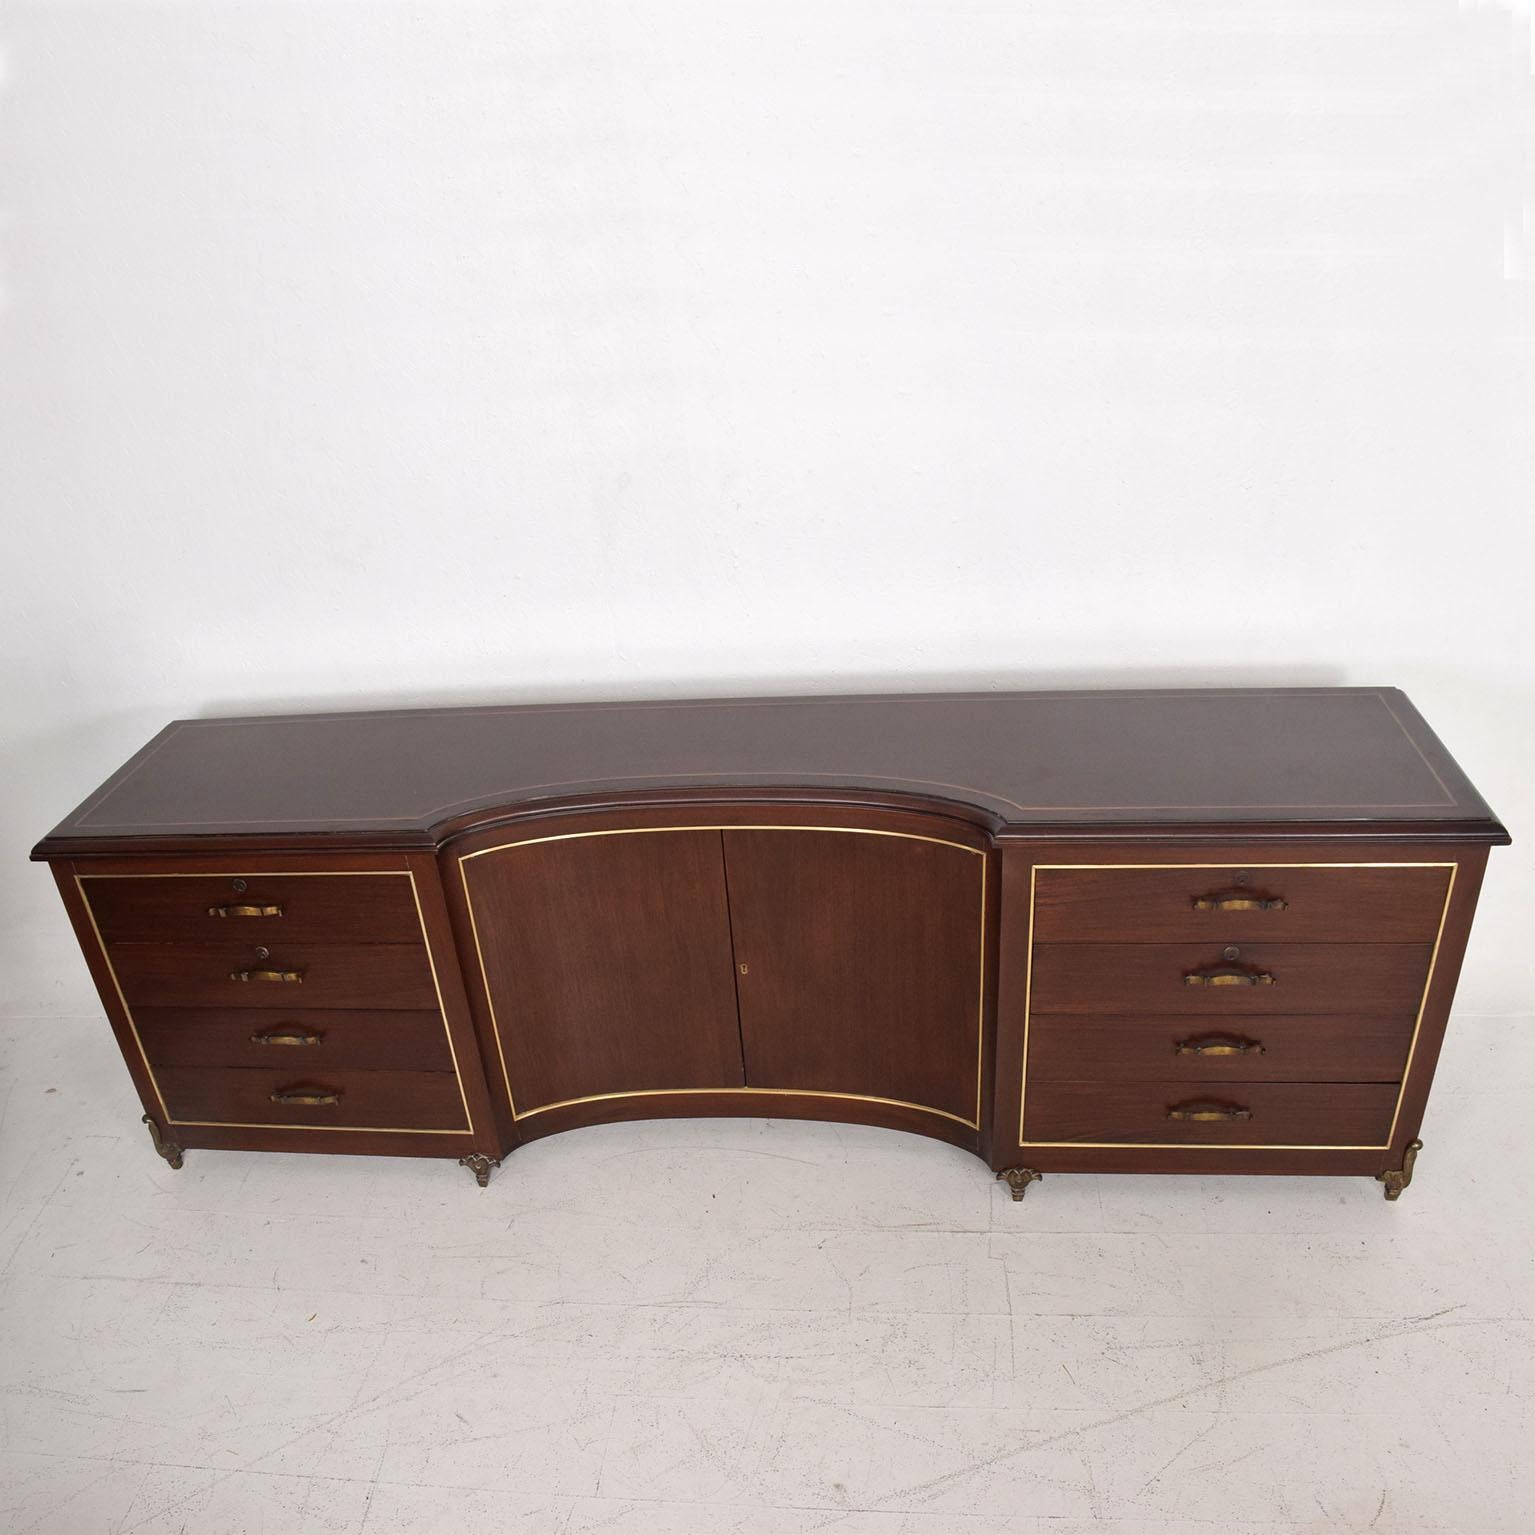 Mexican Modernist Arturo Pani 1950s Mahogany and Bronze Curved Credenza Dresser 1